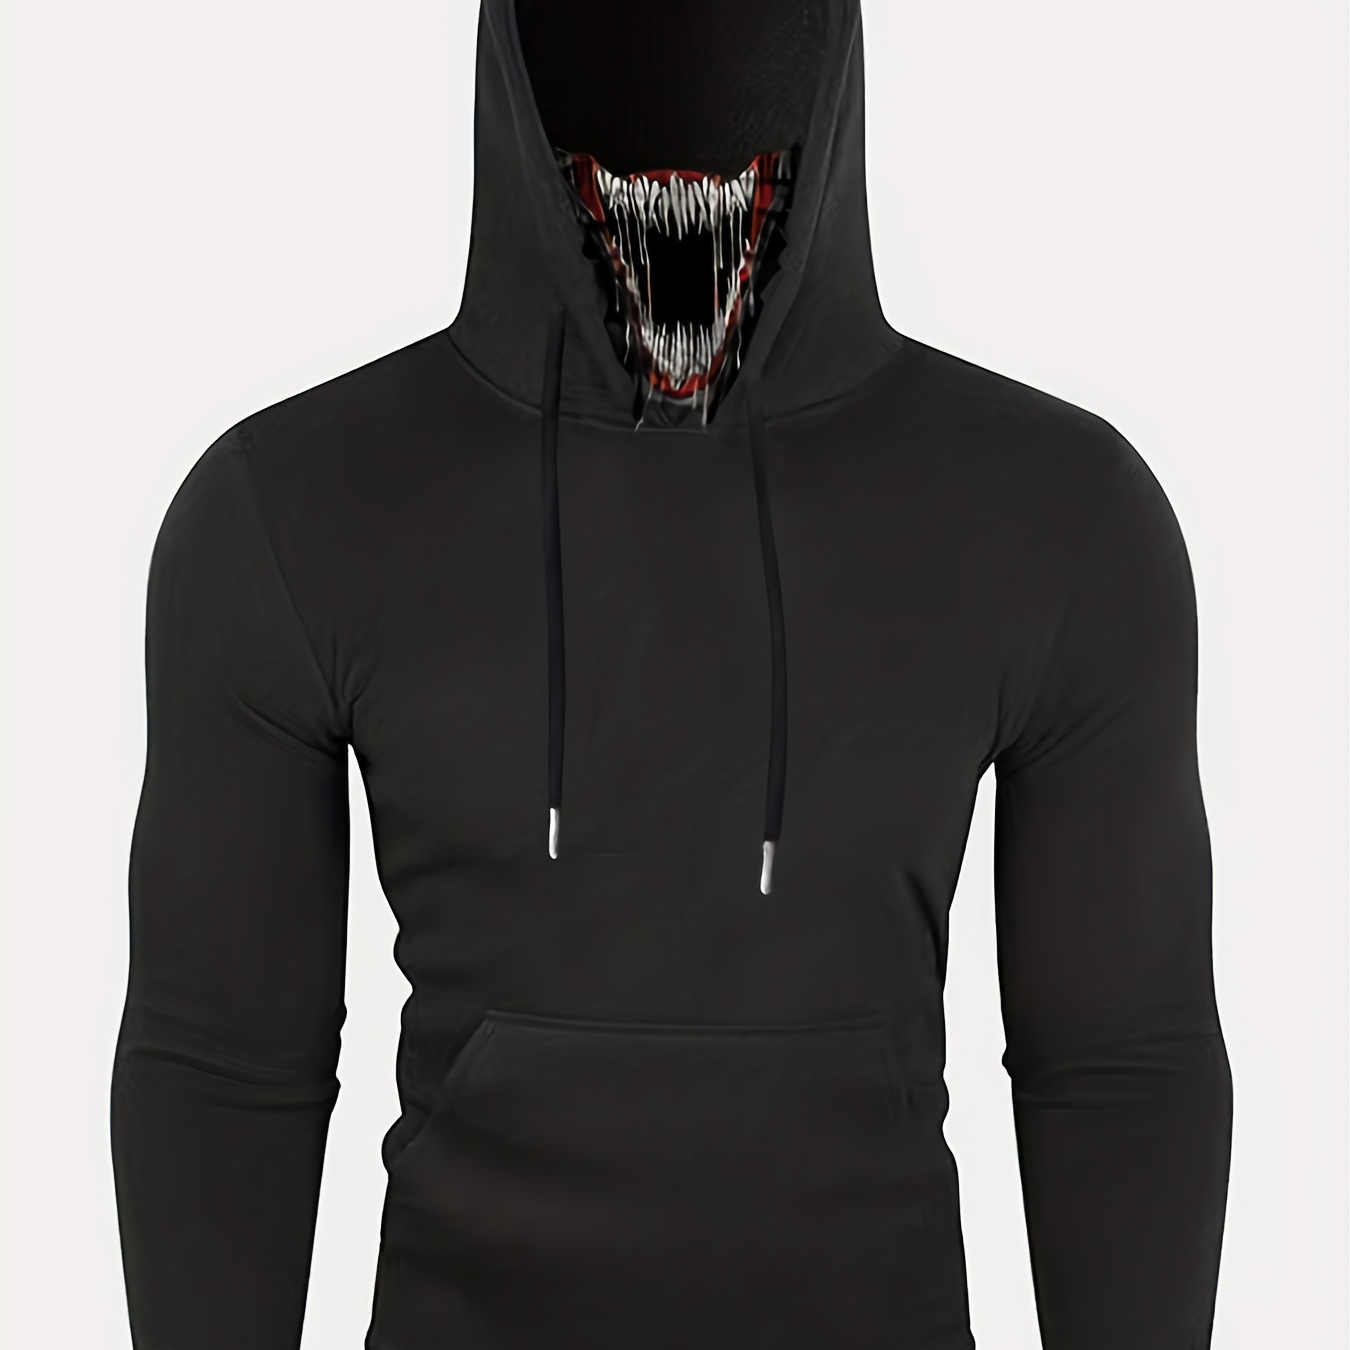 

Plus Size Mens Face Cover Hoodies, Casual "monster" Graphic Drawstring Hooded Sweatshirt With Multicolor, Comfortable Oversized Pullover